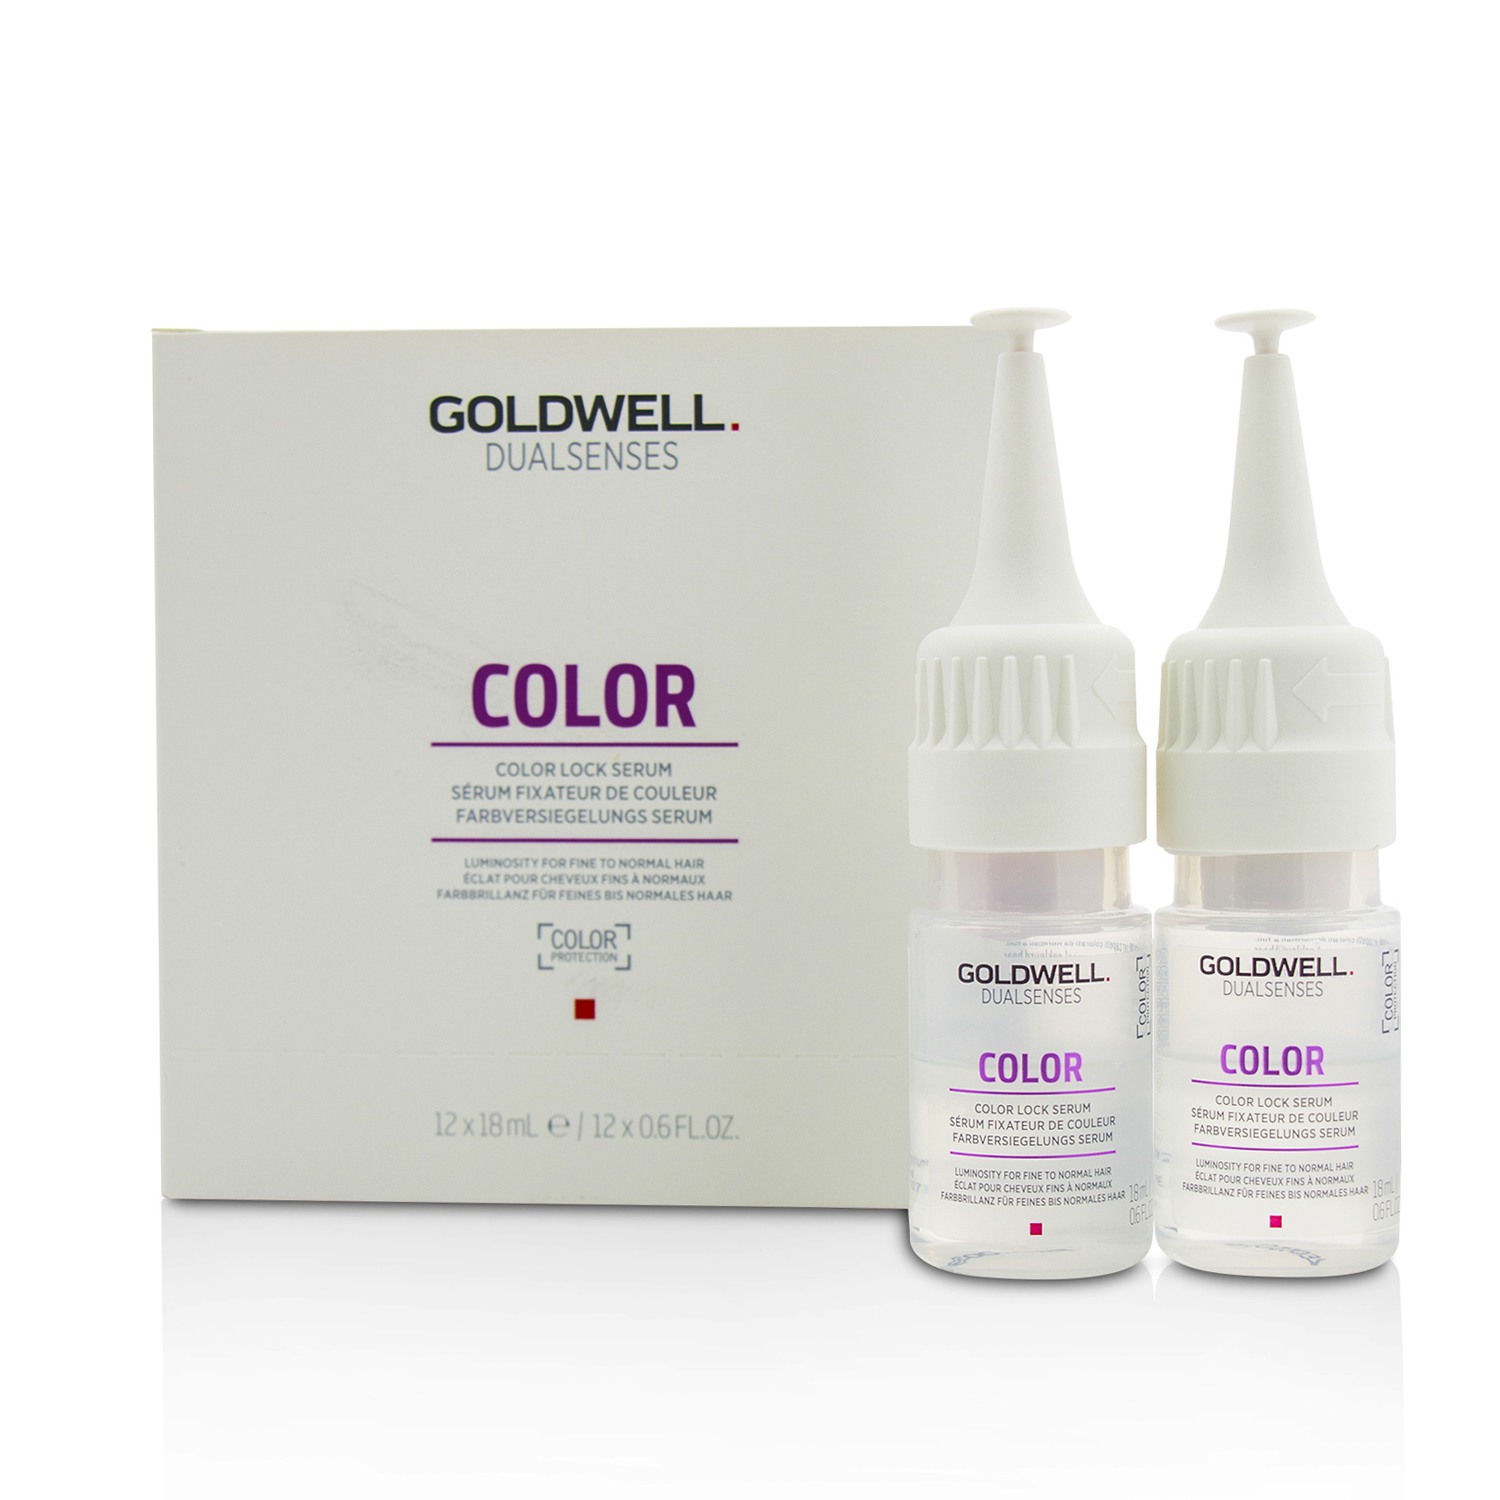 Dual Senses Color Color Lock Serum (Luminosity For Fine to Normal Hair) Goldwell Image